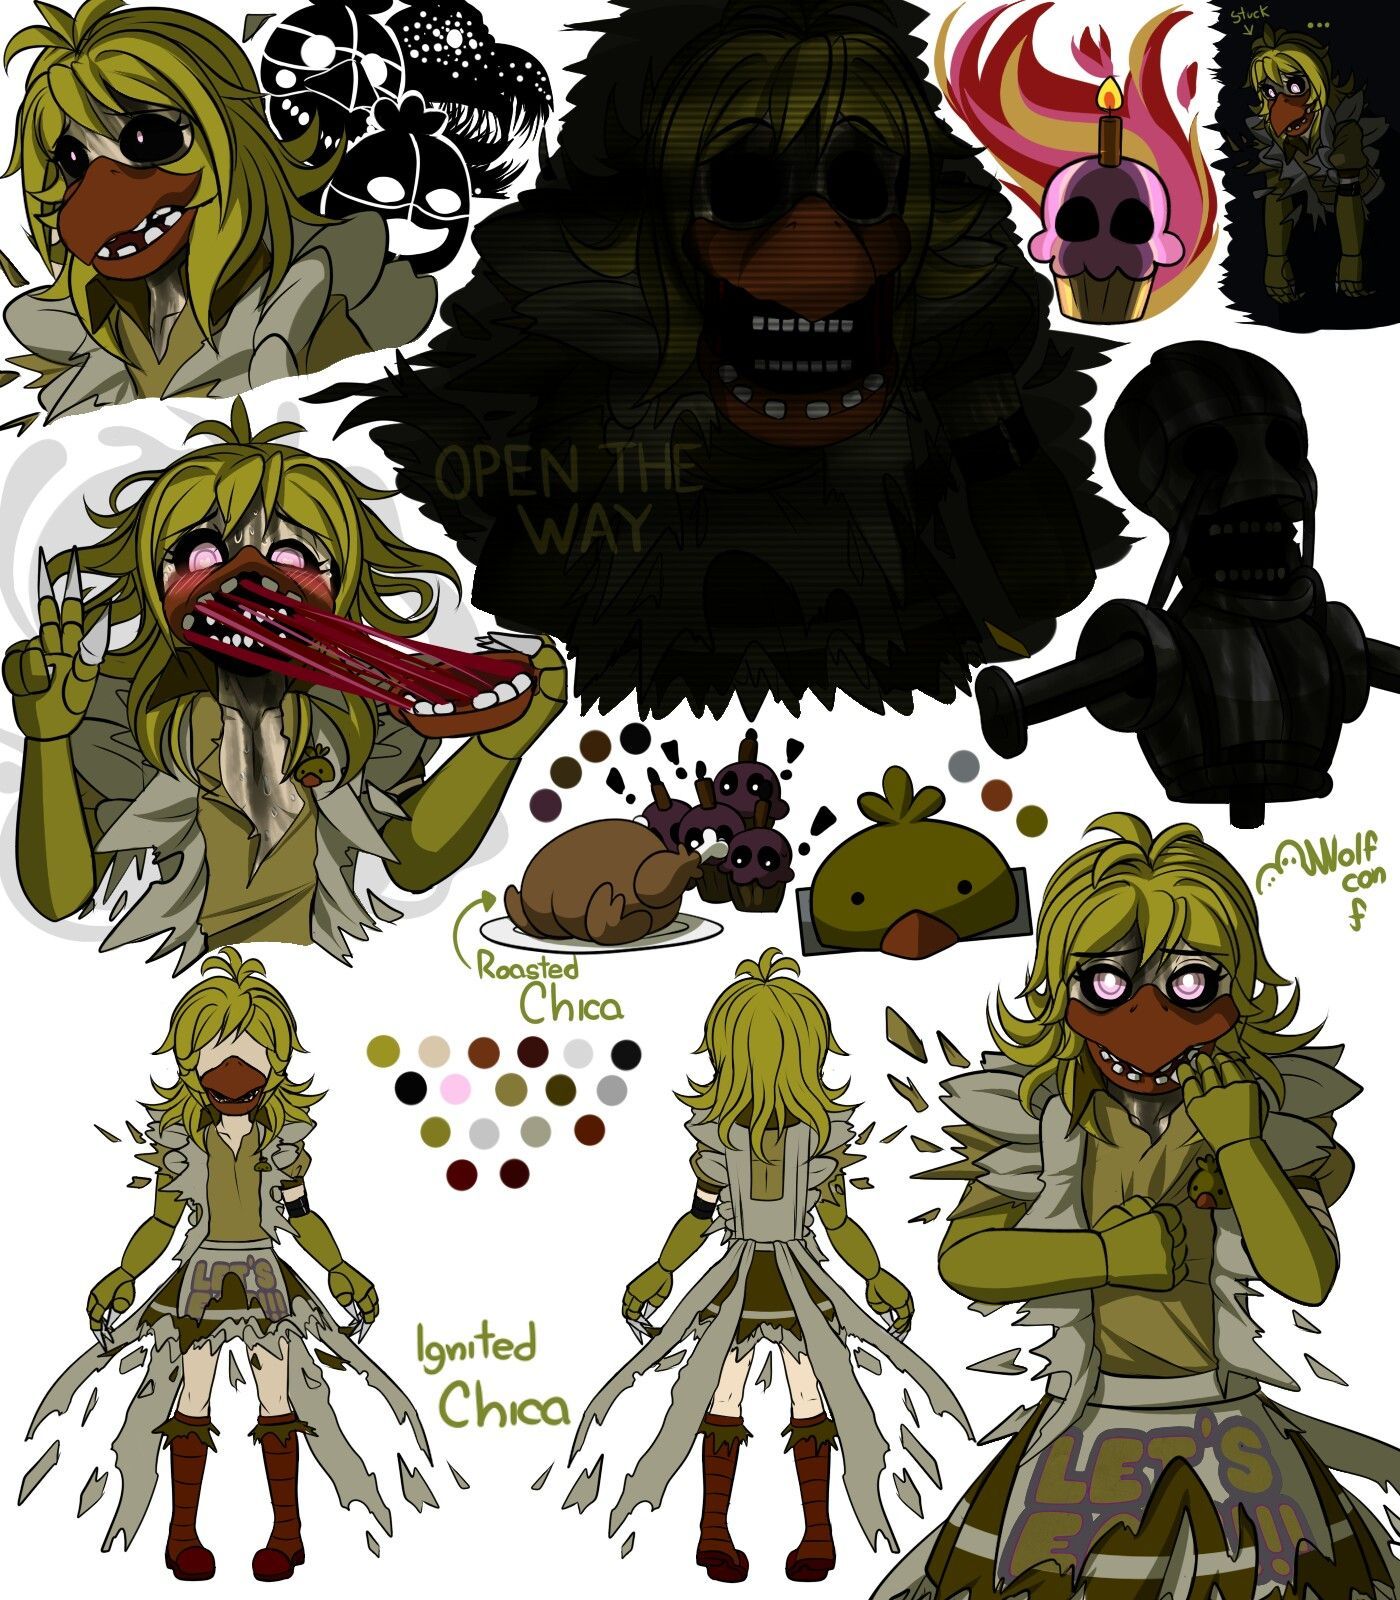 Ignited chica by wolf con f in deviart. Anime fnaf